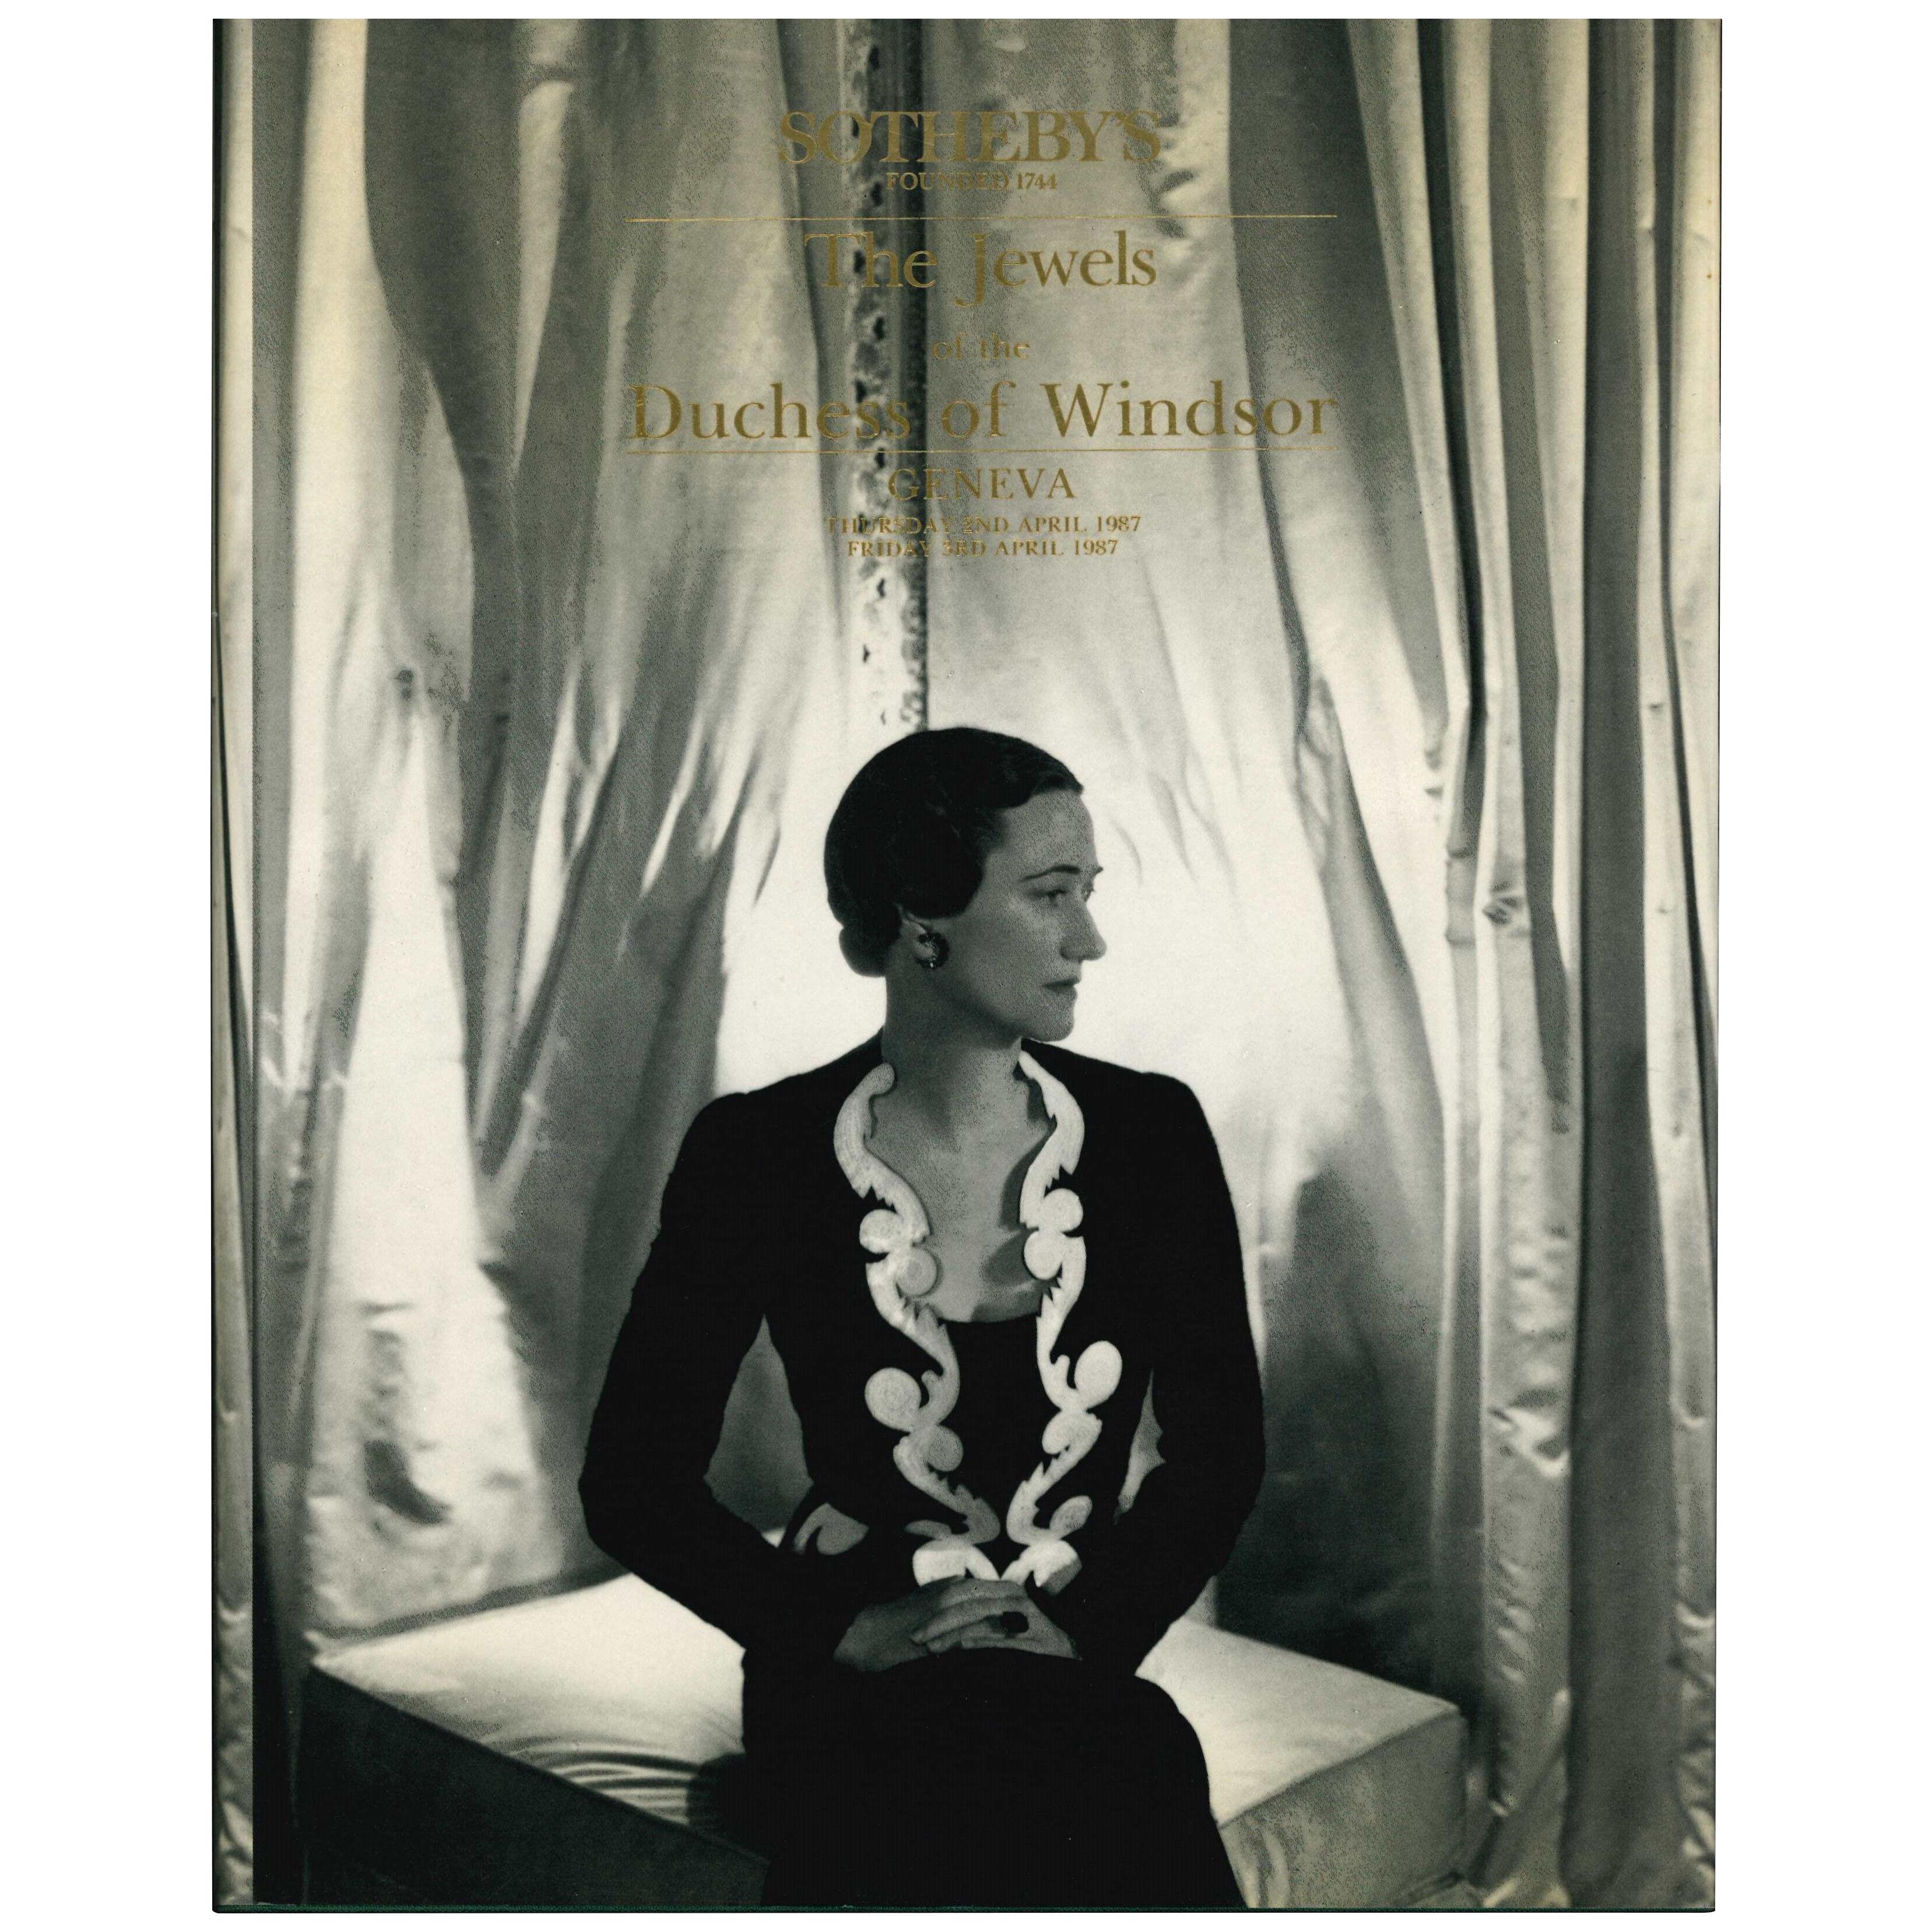 SOTHEBY'S APRIL 1987 - The Jewels of the Duchess of Windsor. Book